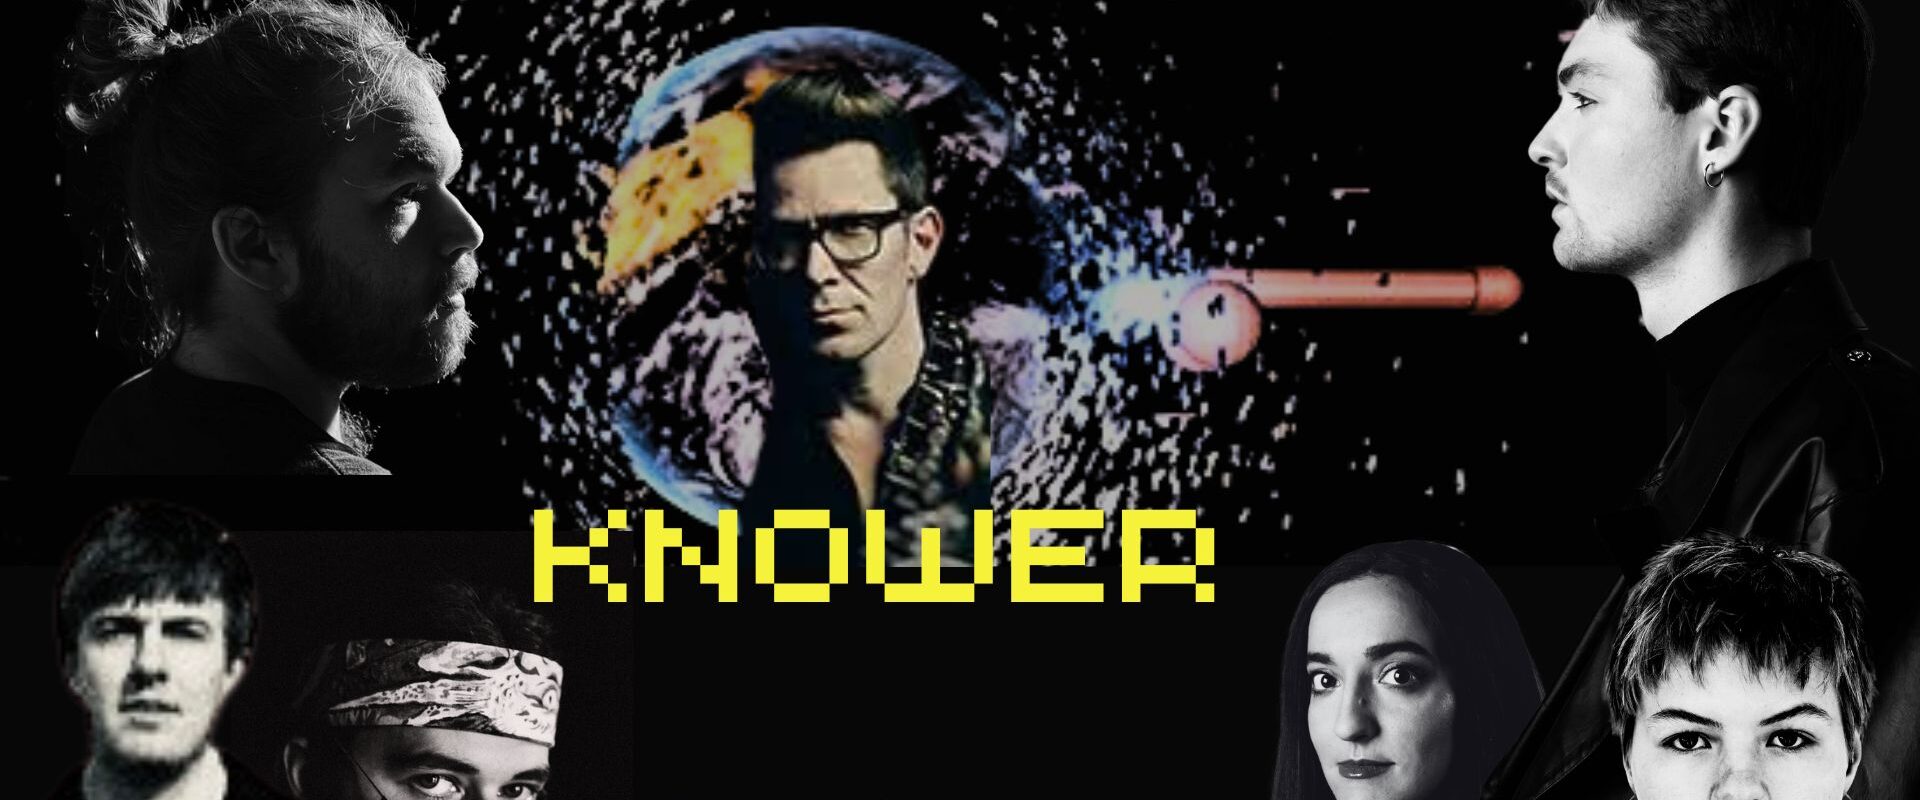 Knower, Butts, Titts and Miguel & 3pointplay 2